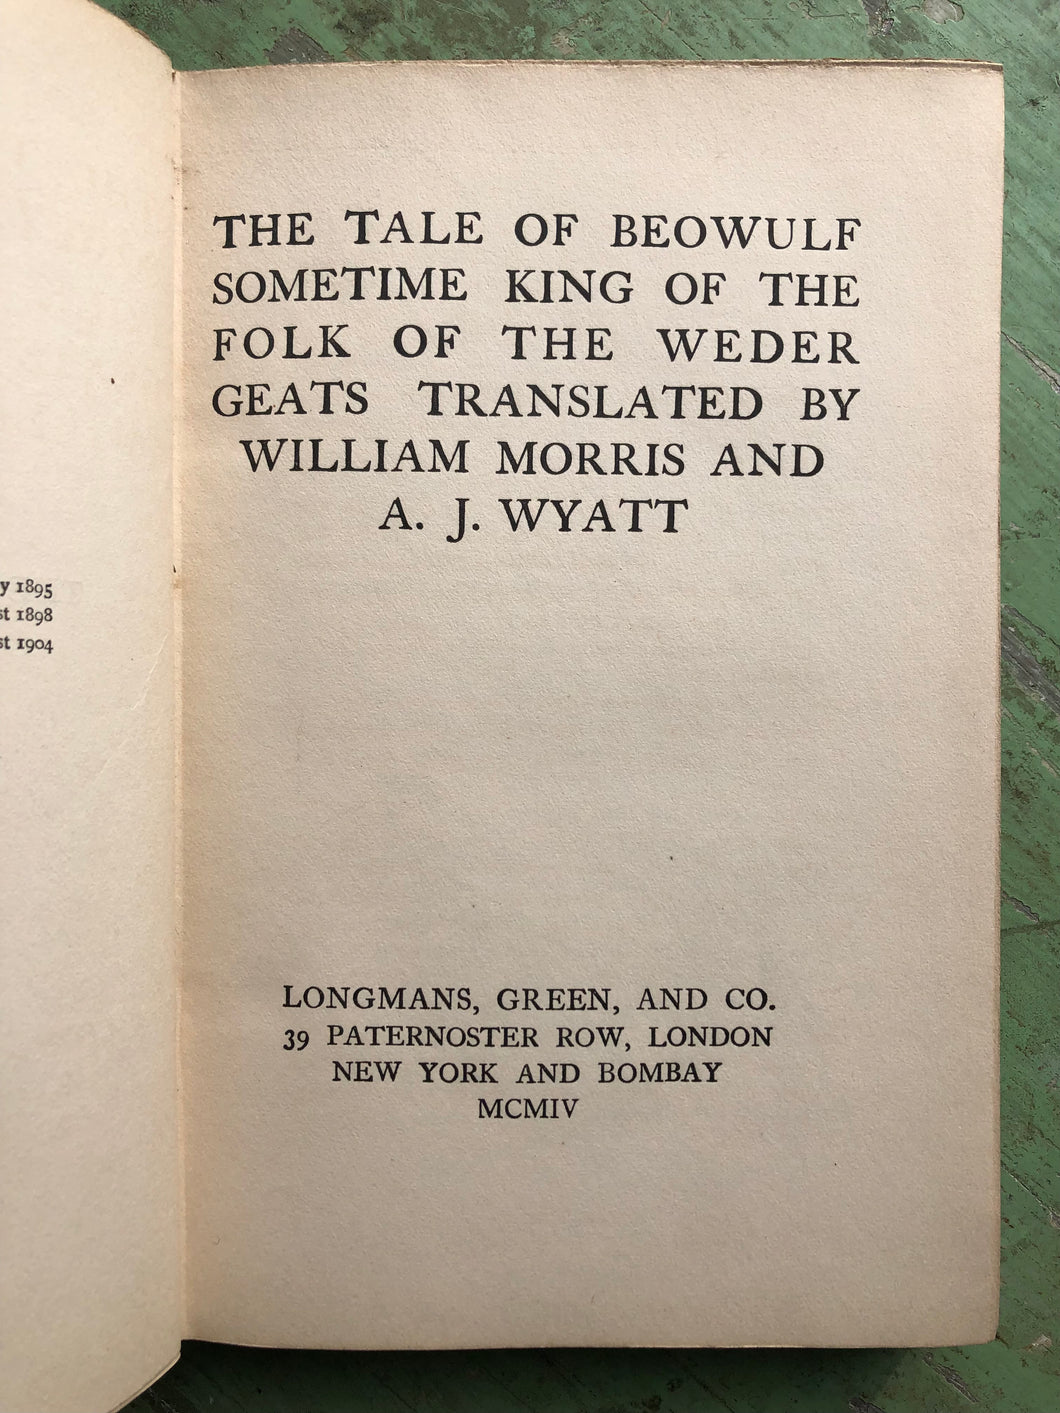 Poetical Works of William Morris: The Tale of Beowulf Sometime King of the Folk of the Weder Geats Translated by William Morris and A. J. Wyatt